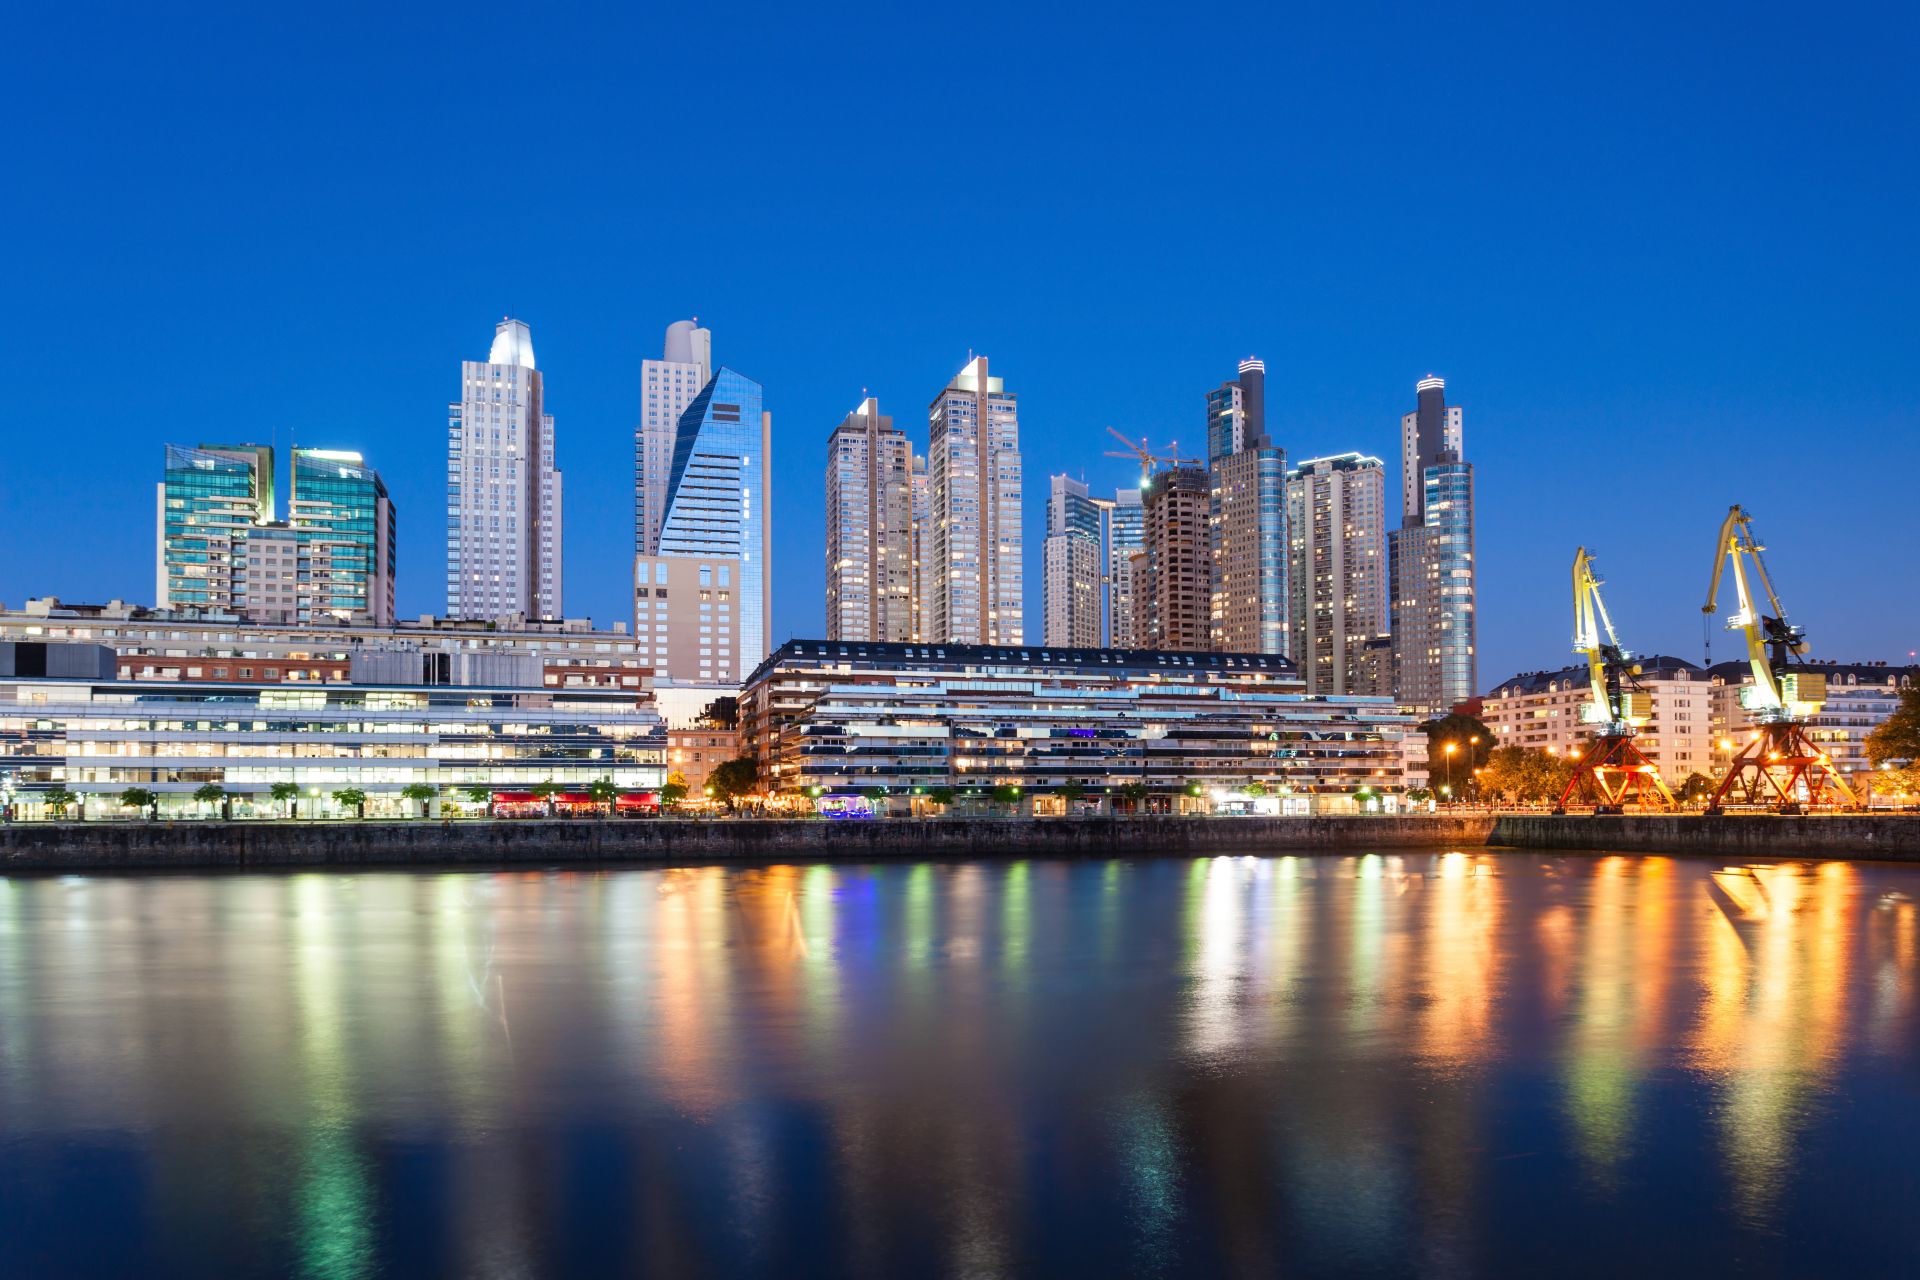 Night view of the Puerto Madero district